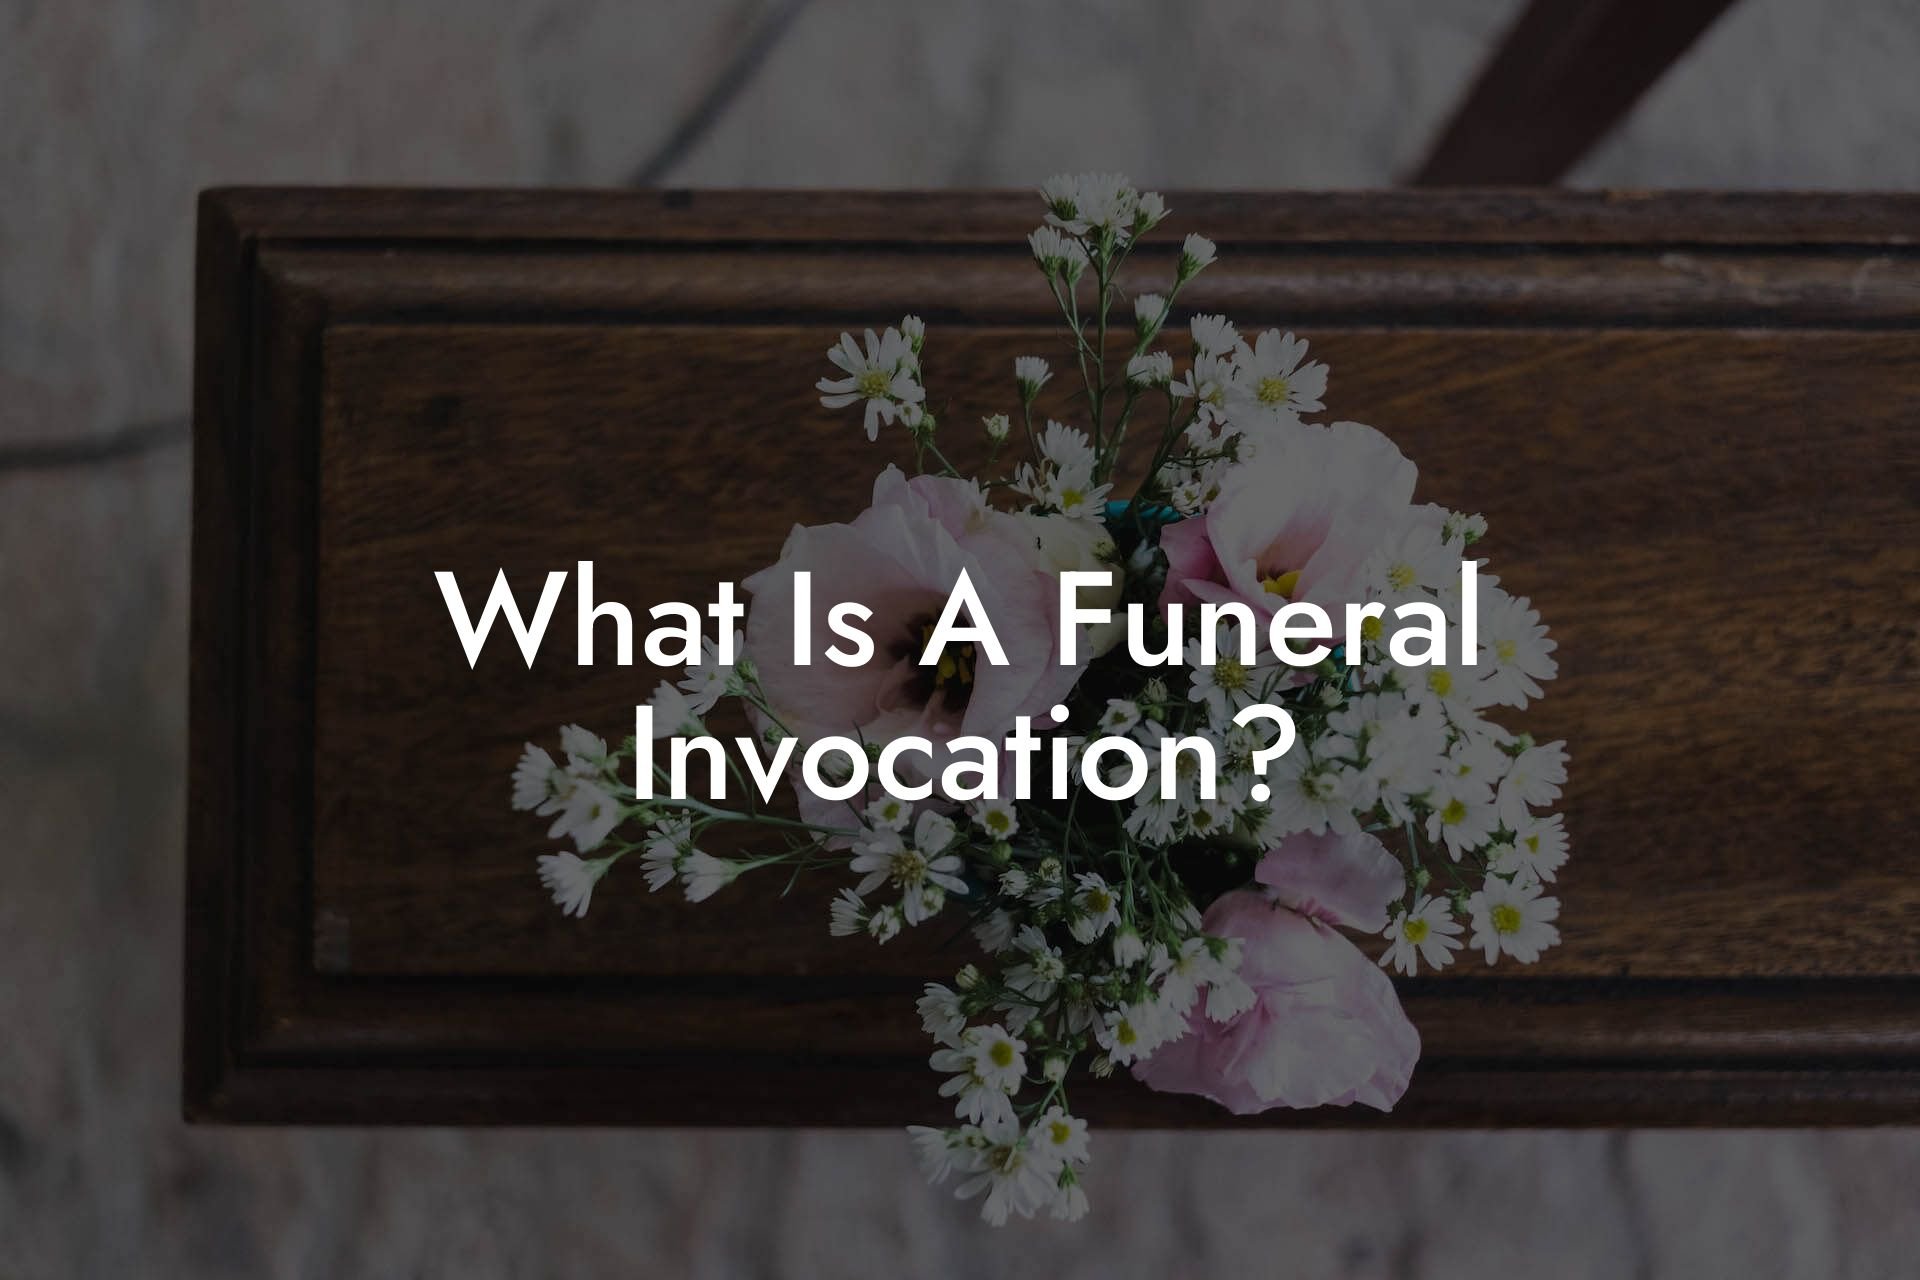 What Is A Funeral Invocation?